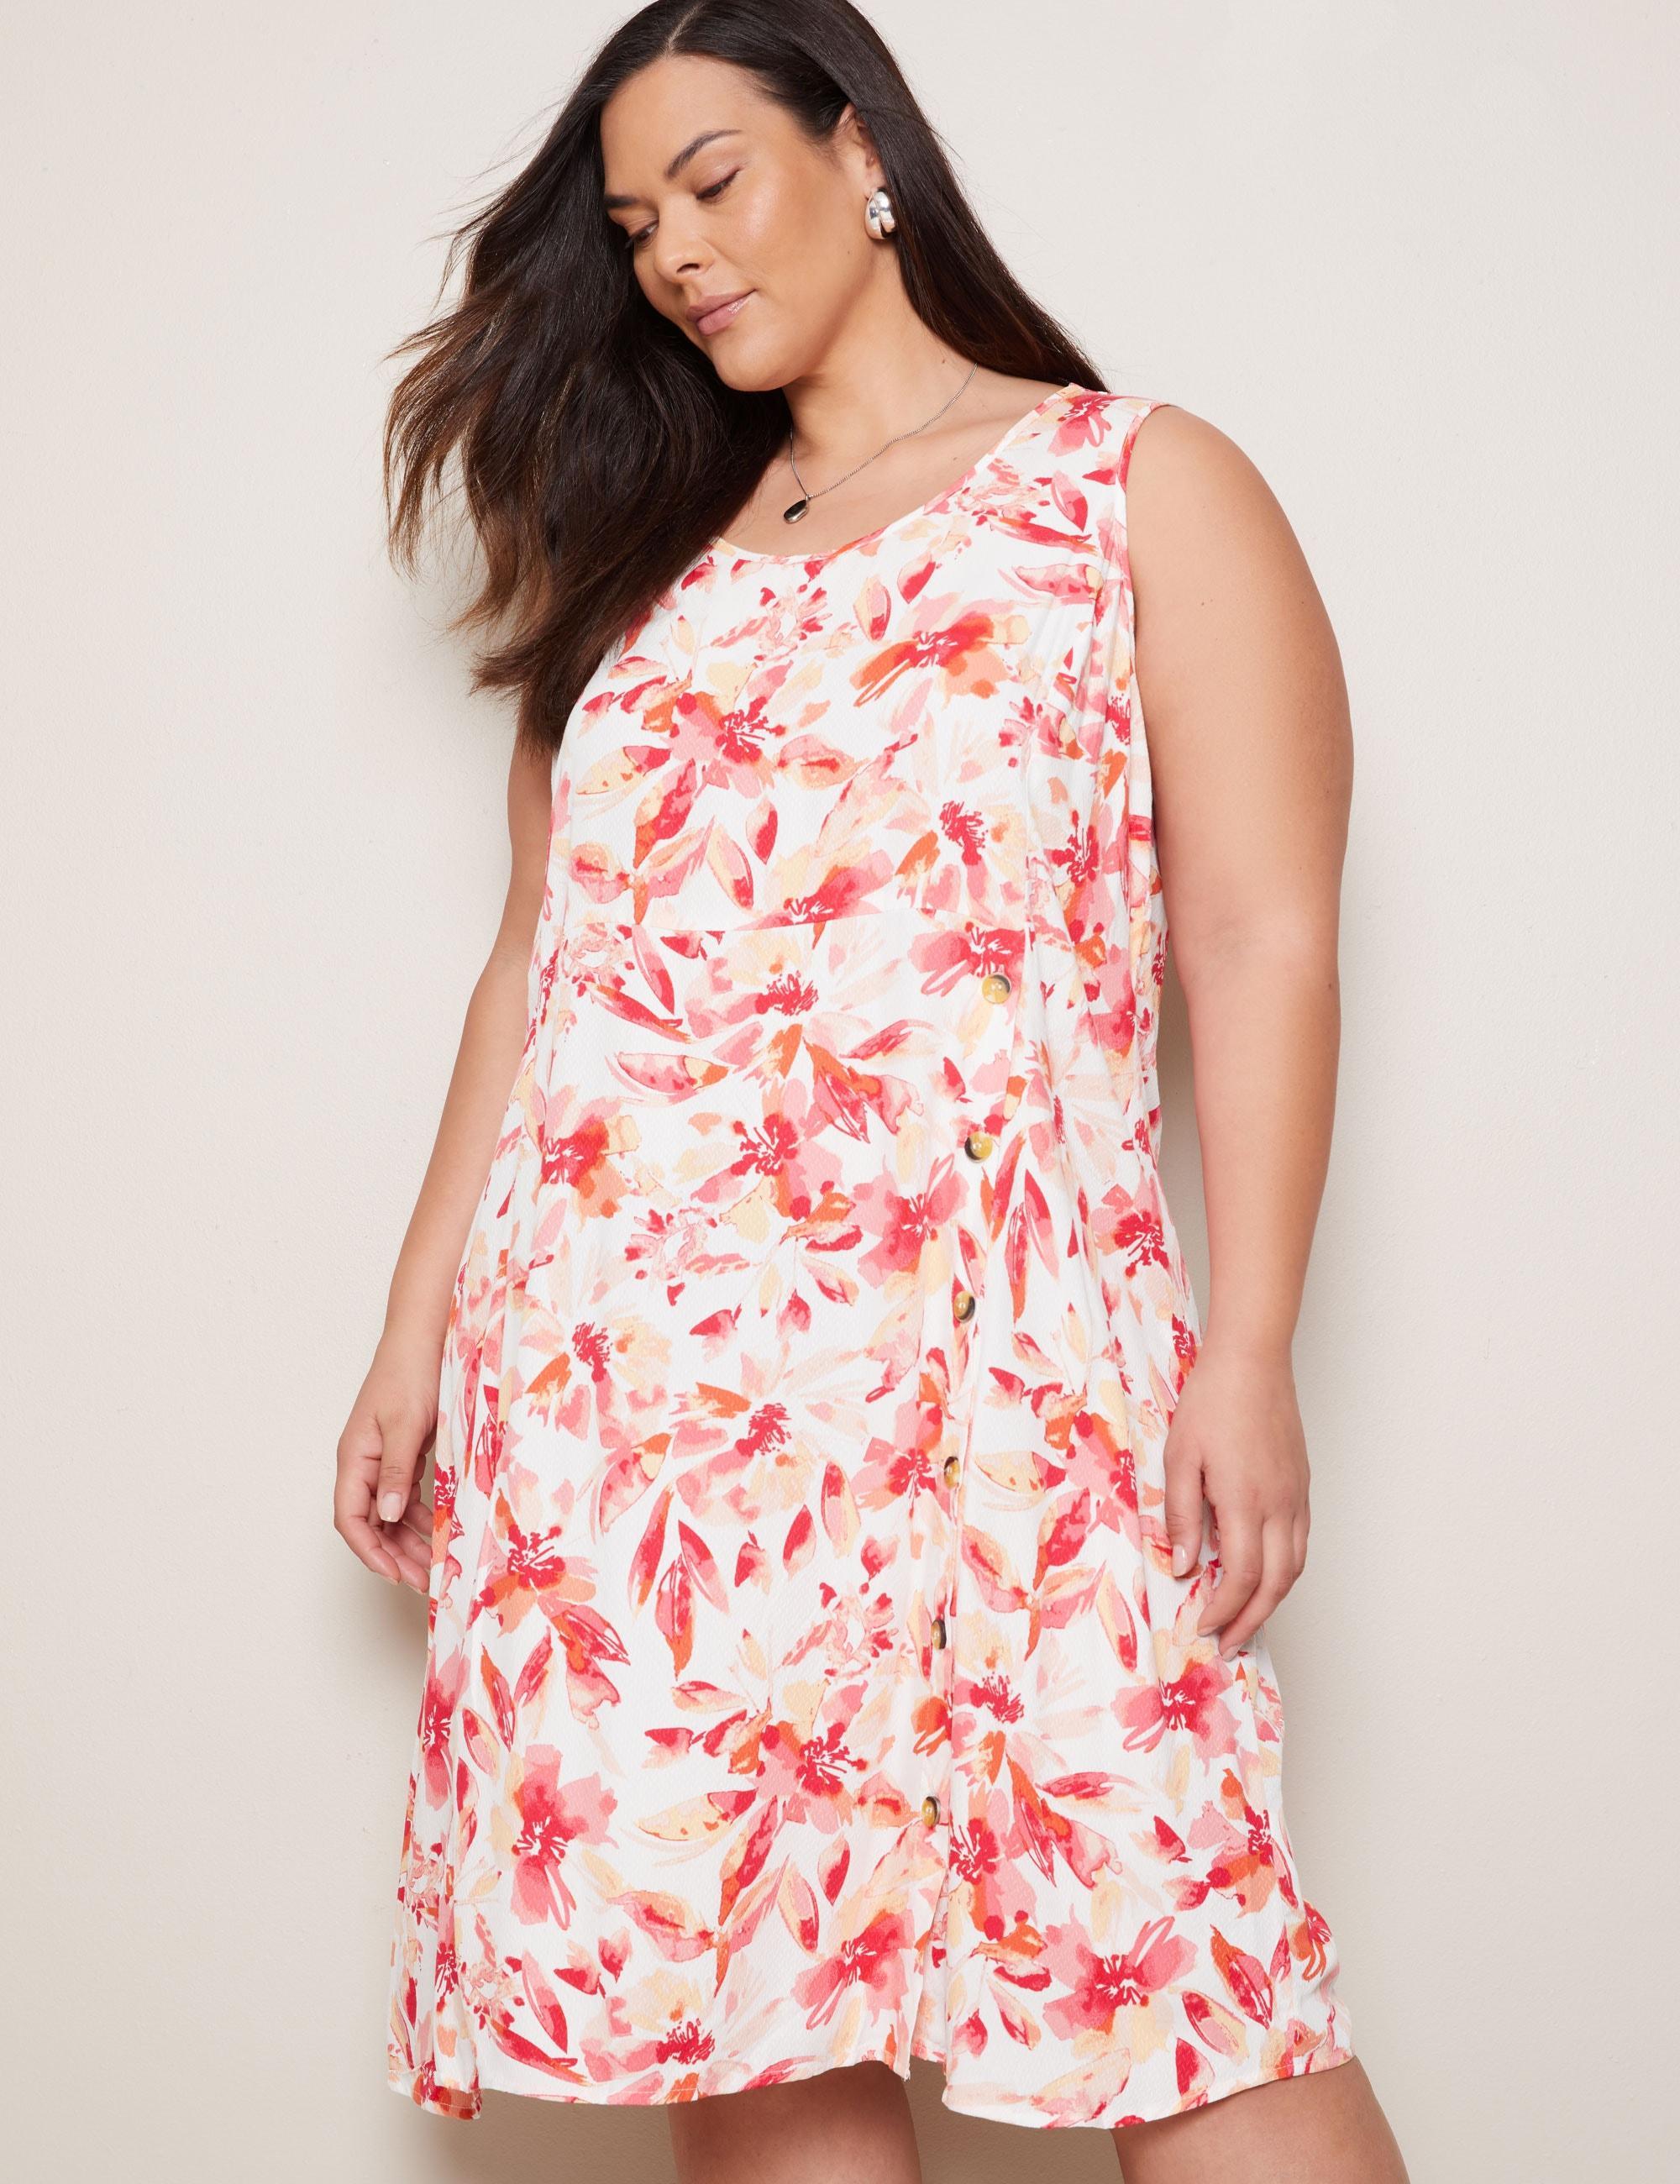 AUTOGRAPH - Plus Size - Womens Midi Dress - Pink - Summer Floral Shift Dresses - Bright Florals - Sleeveless - Florals - Relaxed Fit Women's Clothing